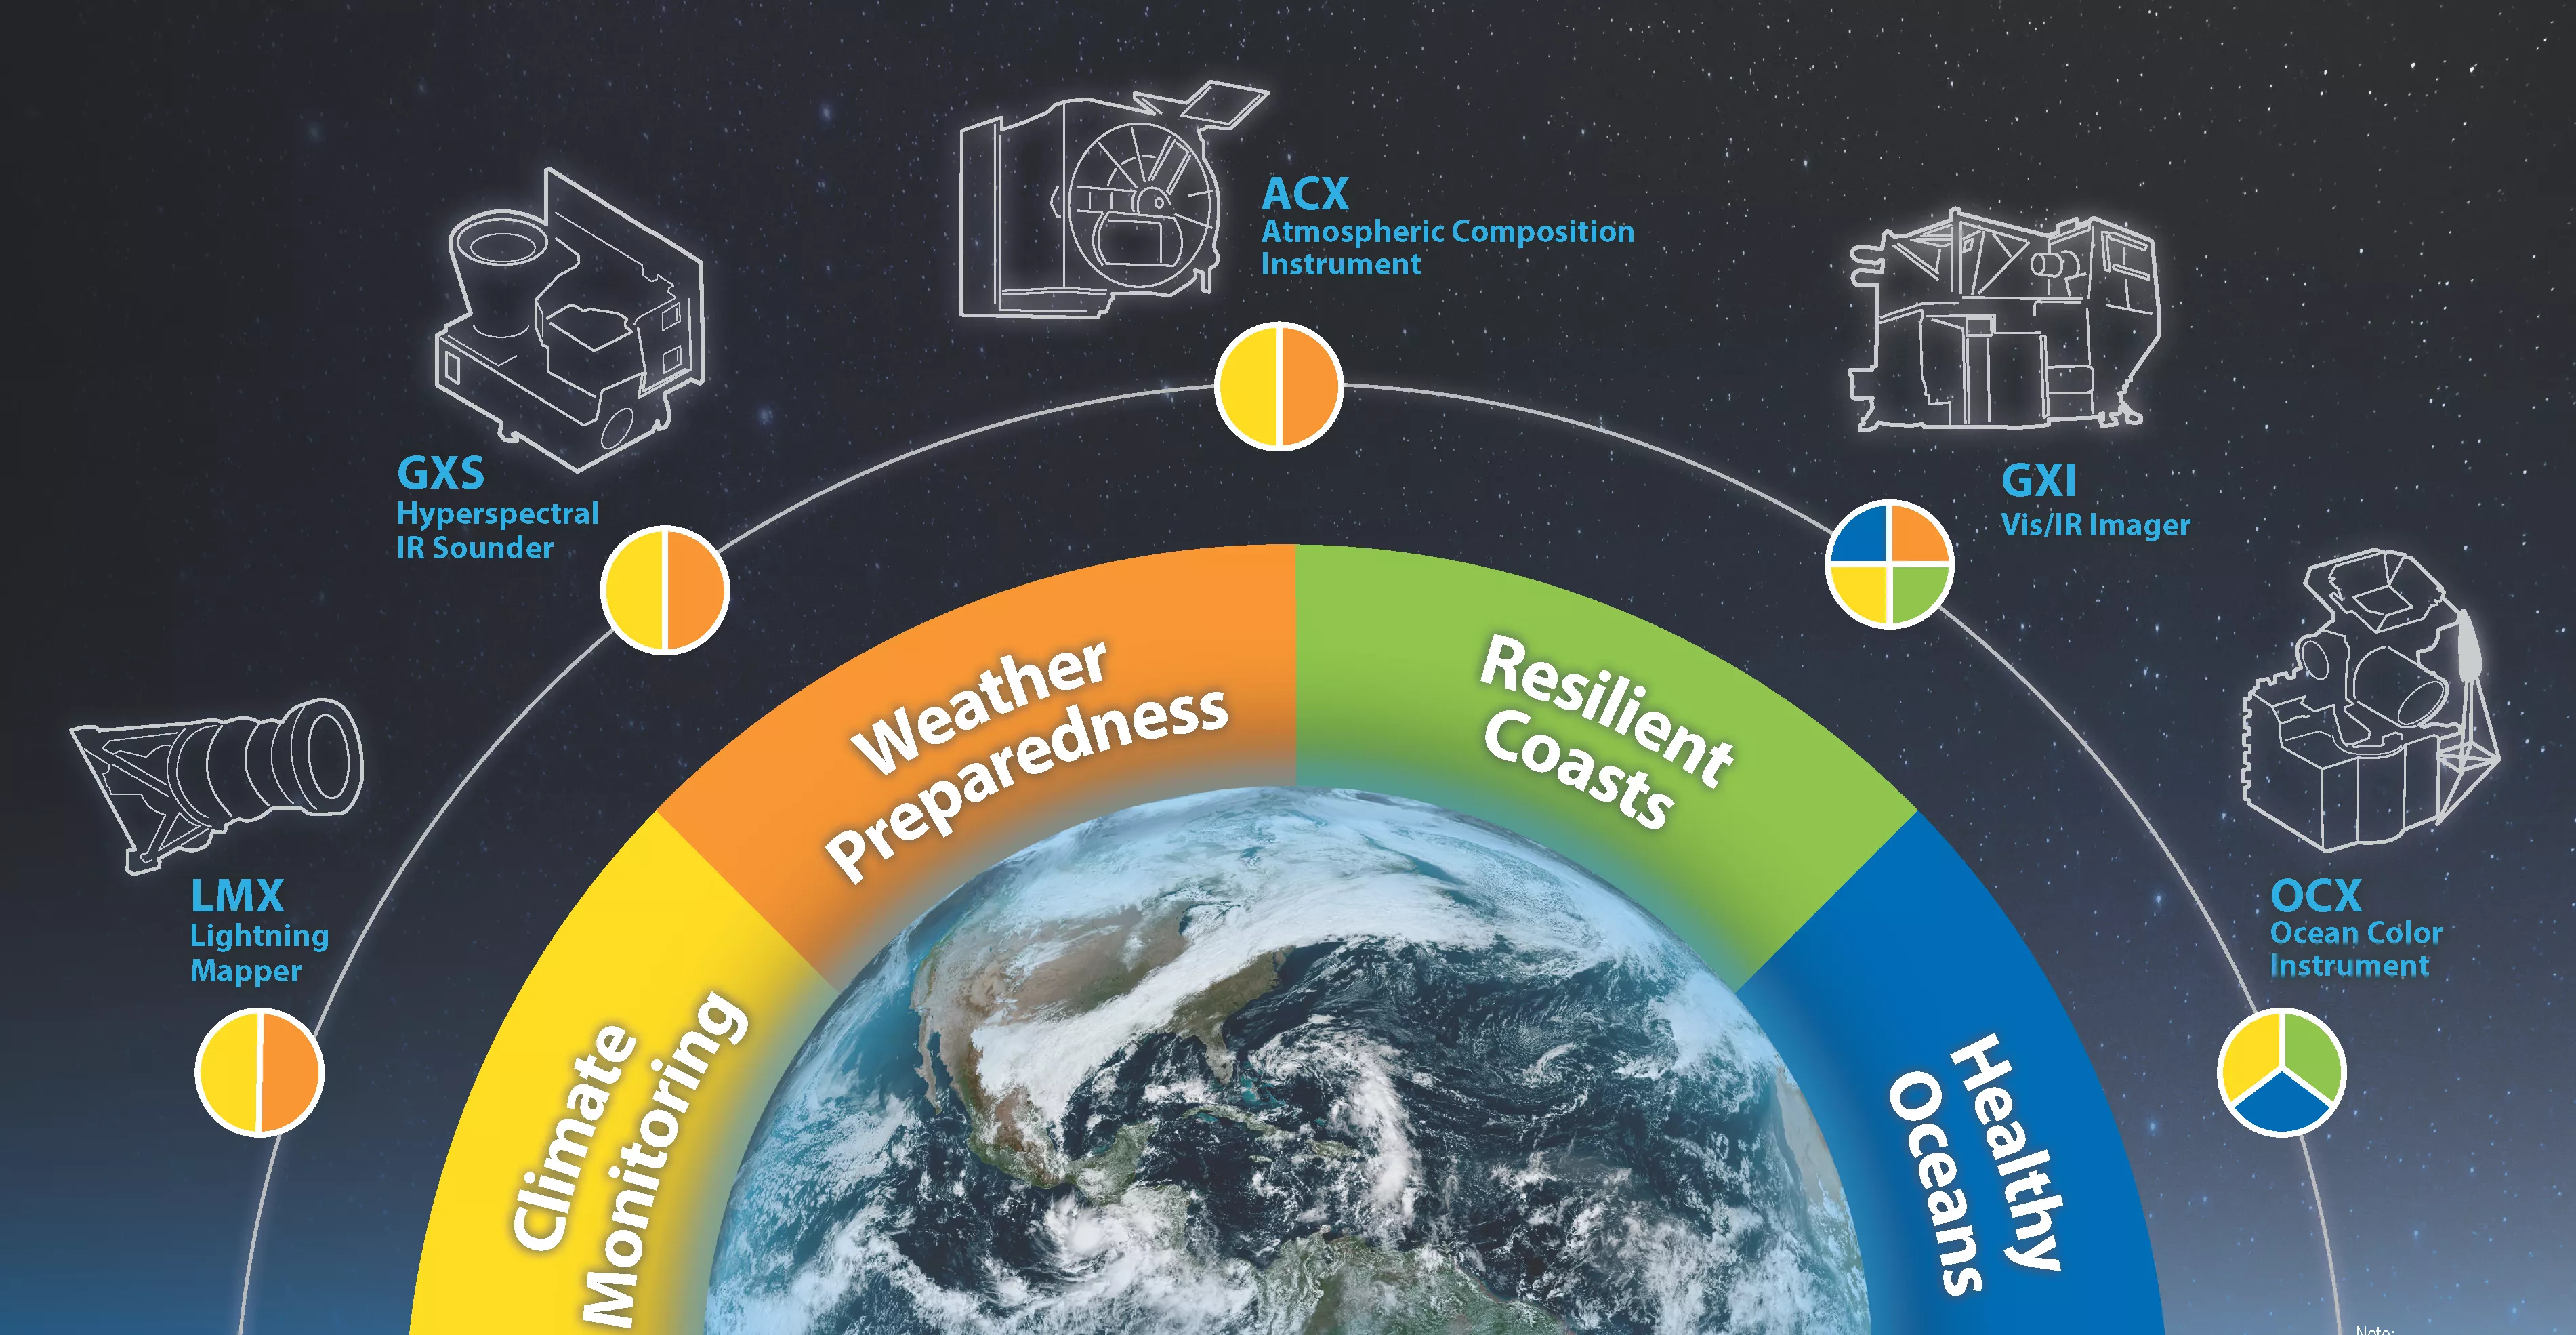 four color designations are arched over an image of half of earth rising from the bottom. they are labeled yellow - climate monitoring, orange - weather preparedness, green - resilient coasts, and blue - healthy oceans.